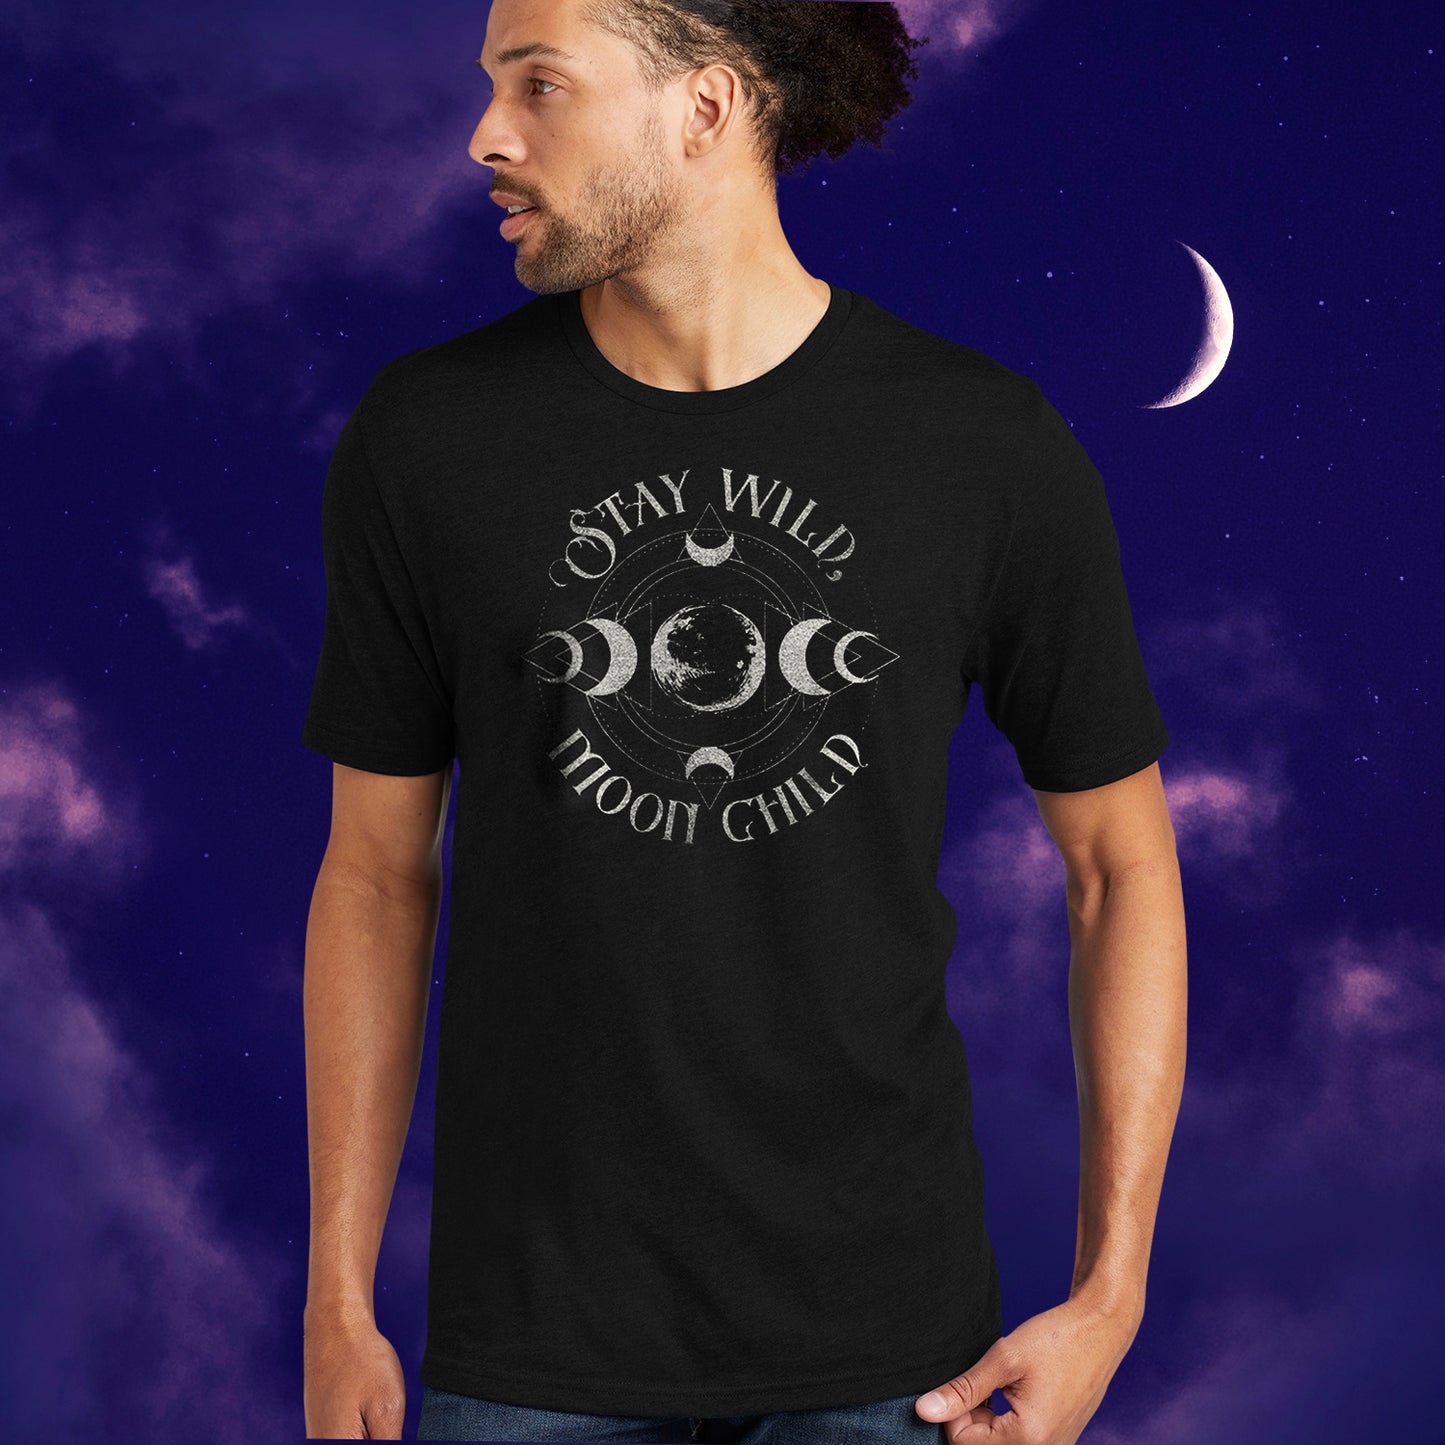 A male model wearing a black T-shirt with silver text saying "Stay Wild Moon Child." There is a depiction of the Moon in the center, with crescent Moon phases at top, bottom, left, and right of the center. There are thin circles around the moon phases, connecting them to each other. Behind the model is a nighttime sky.